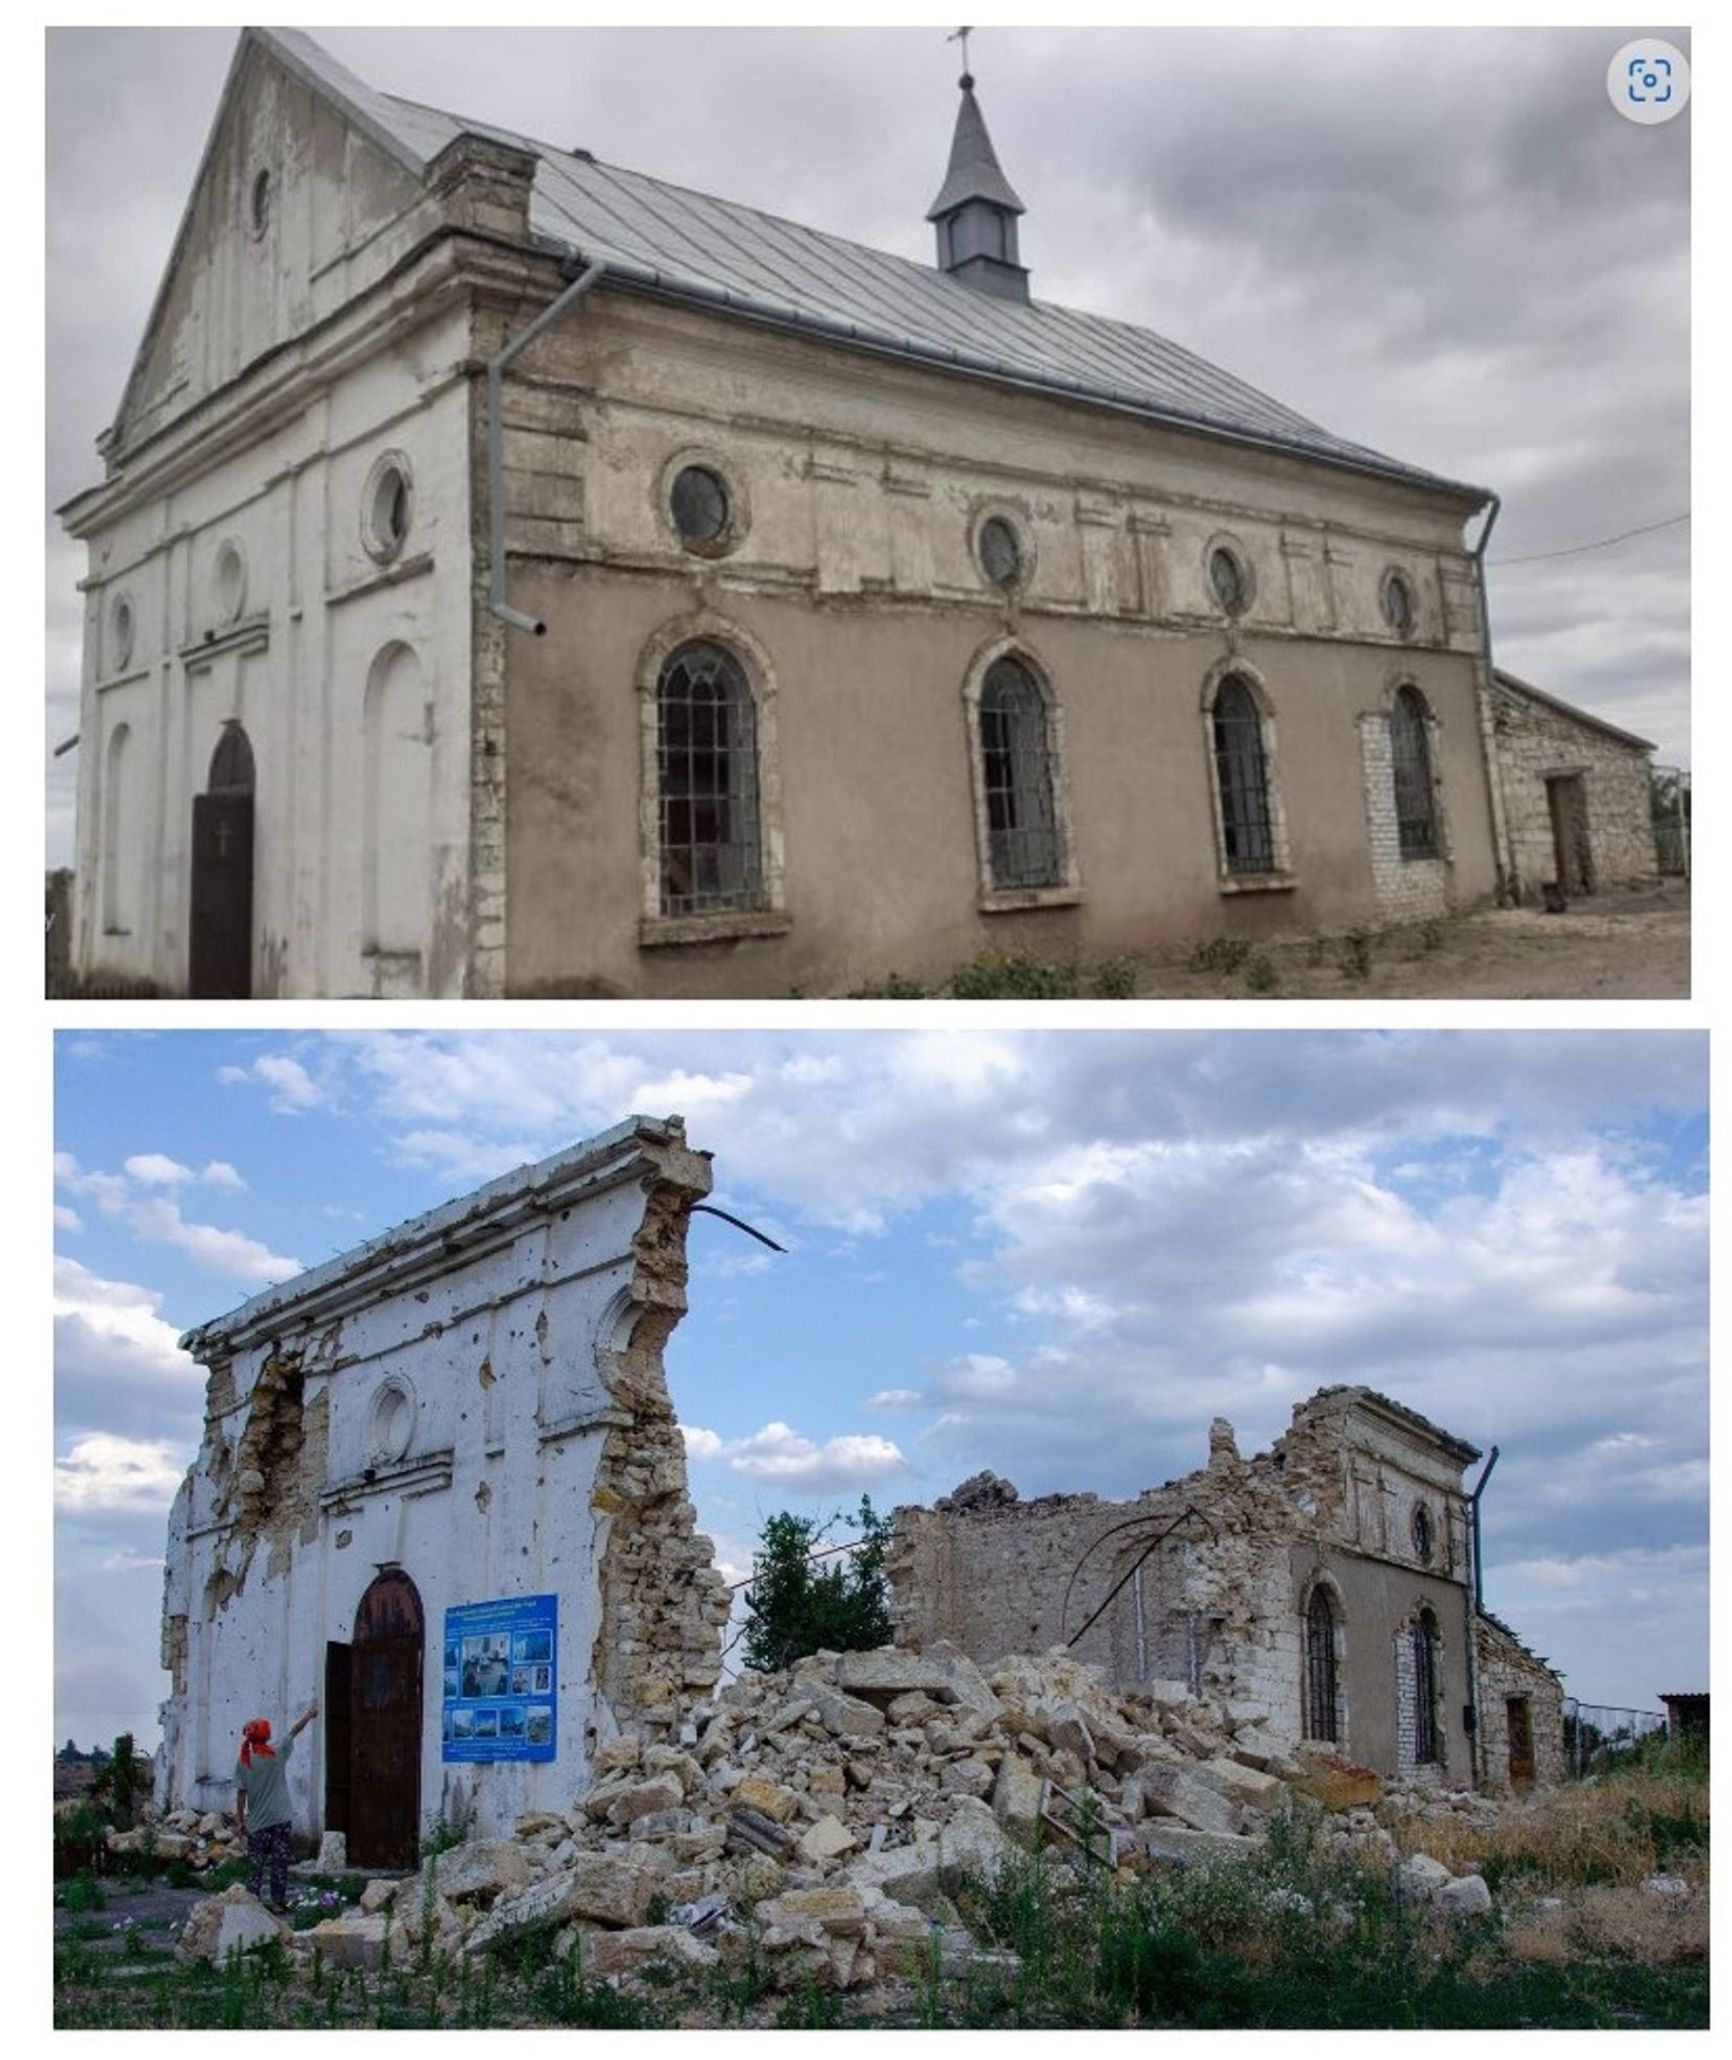 The Roman Catholic Church of the Immaculate Conception of the Blessed Virgin Mary before and after the Russian attack